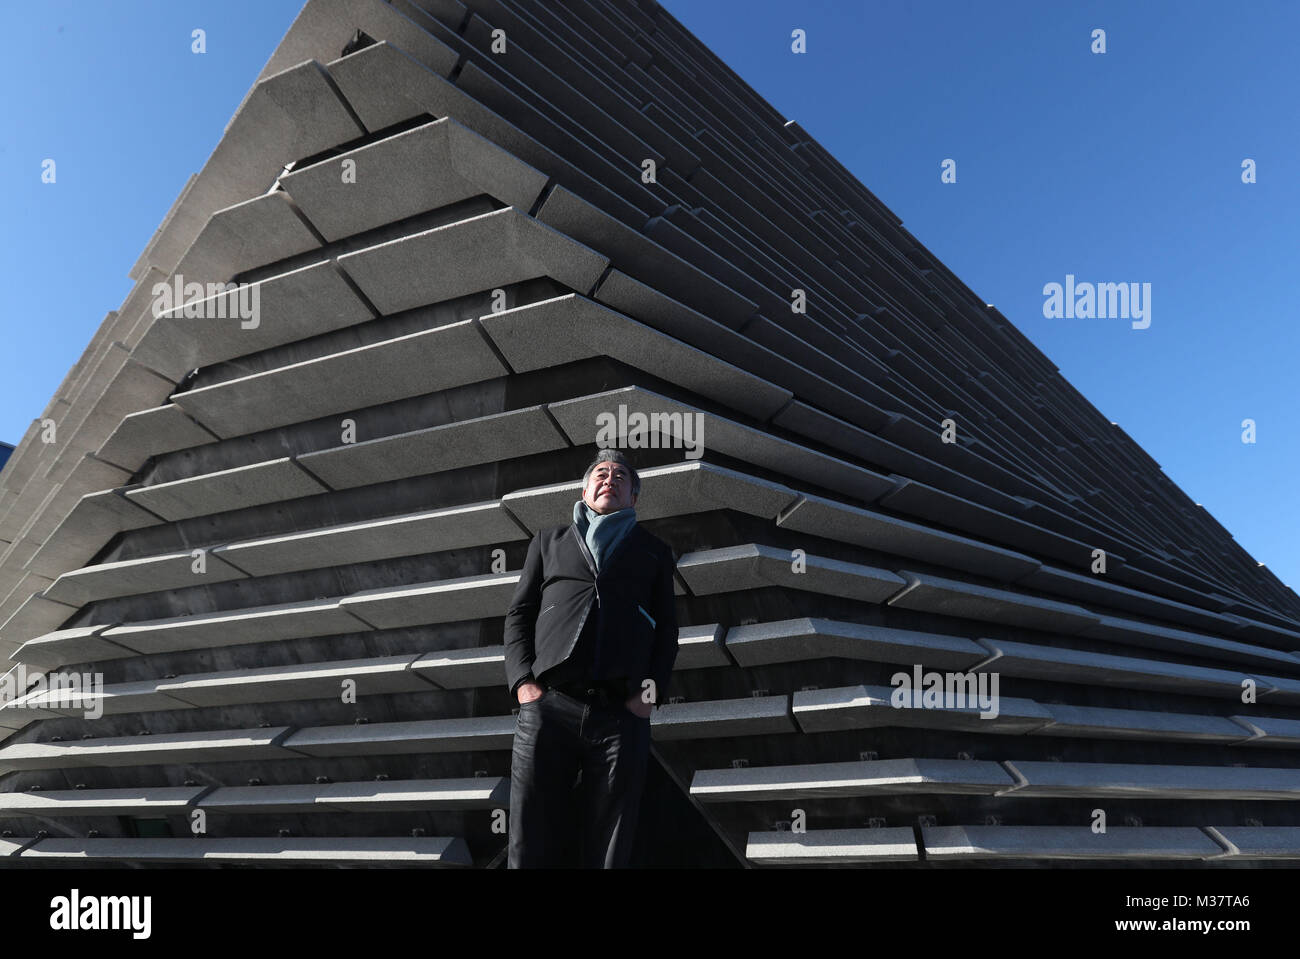 Japanese architect Kengo Kuma as he views the finished exterior of the new eighty million pound V&A Dundee museum for the first time. The designer met workers as the focus moves to the interior of the V&A, fitting out gallery spaces, a cafe and a restaurant ahead of its opening in September. Stock Photo